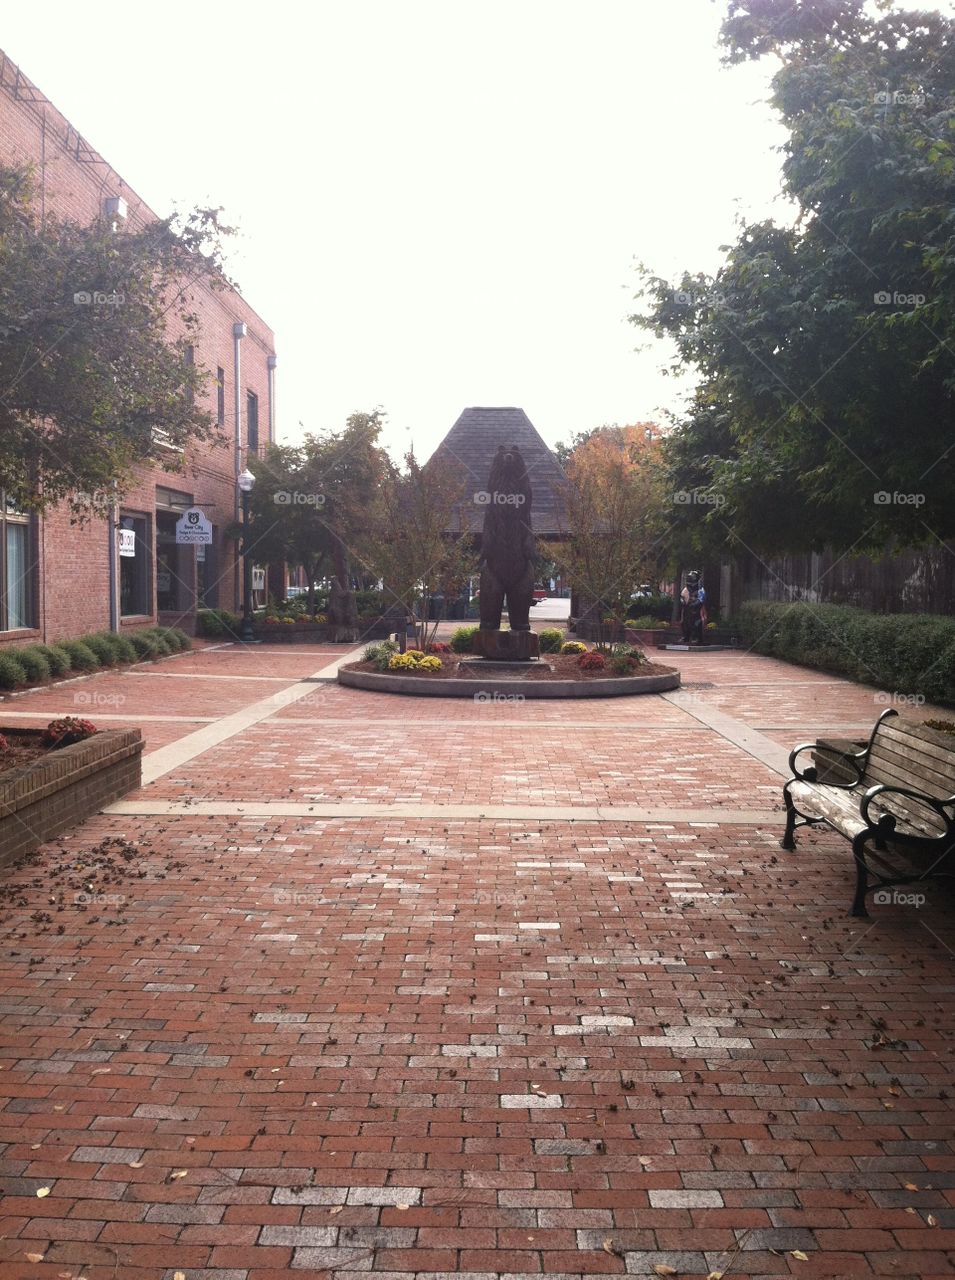 Bear at New Bern plaza. Bear statue in the middle of a walkway